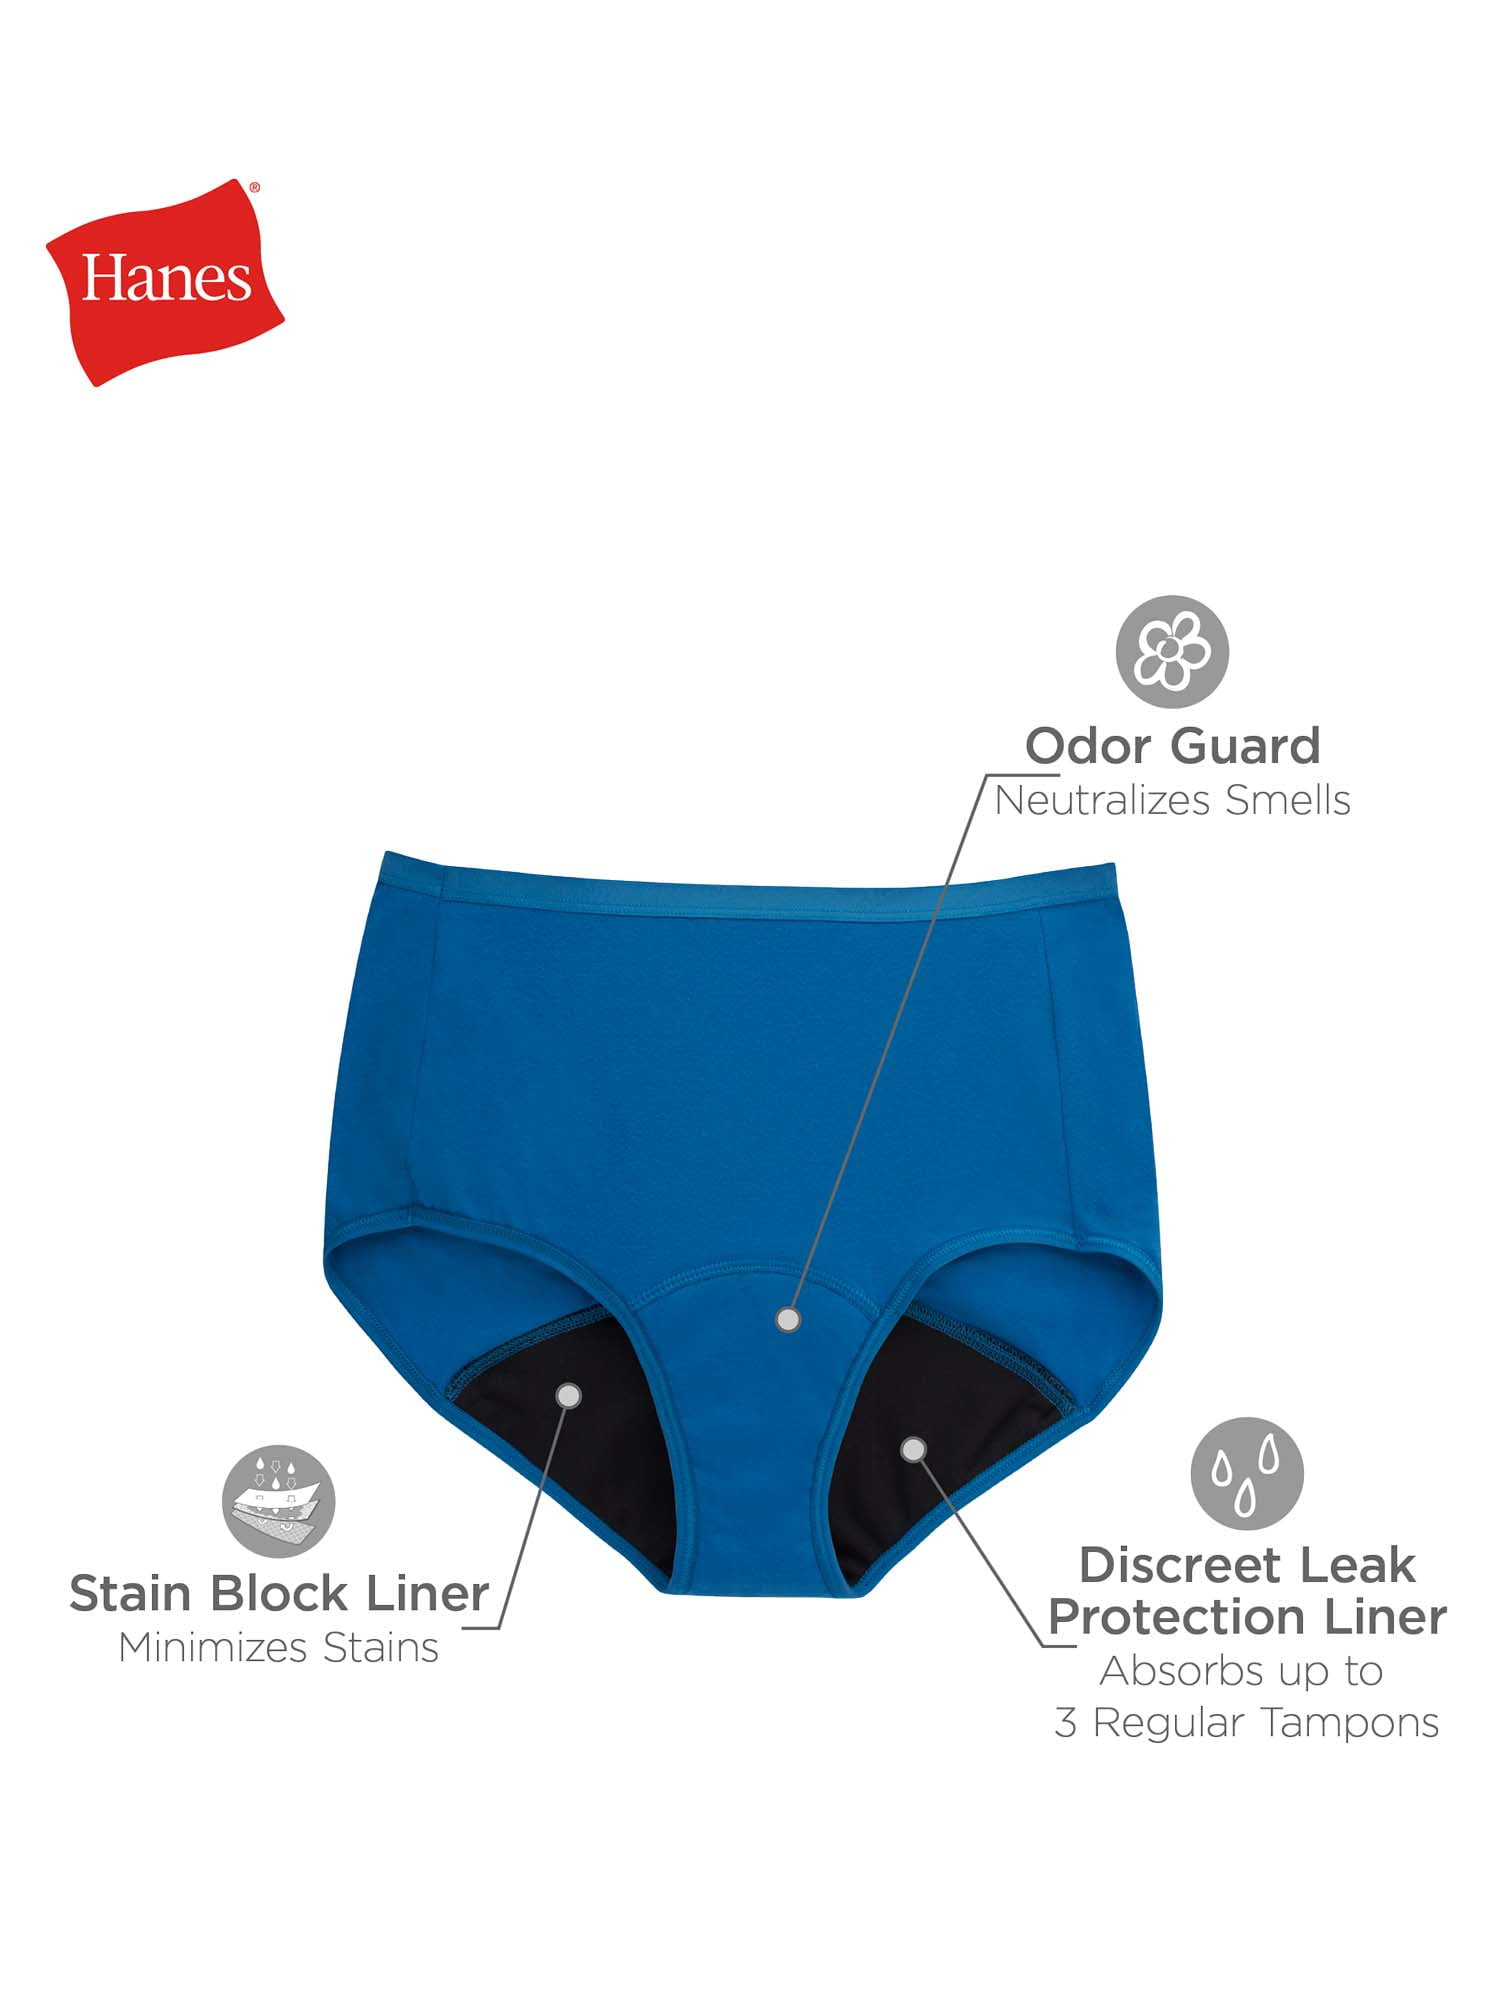 Briefs  Womens Hanes Hanes Comfort, Period.™ Moderate Period Women'S Brief  Underwear Pack, Moderate Leaks, Black/Assorted Blues, 3-Pack » Every Six  Weeks